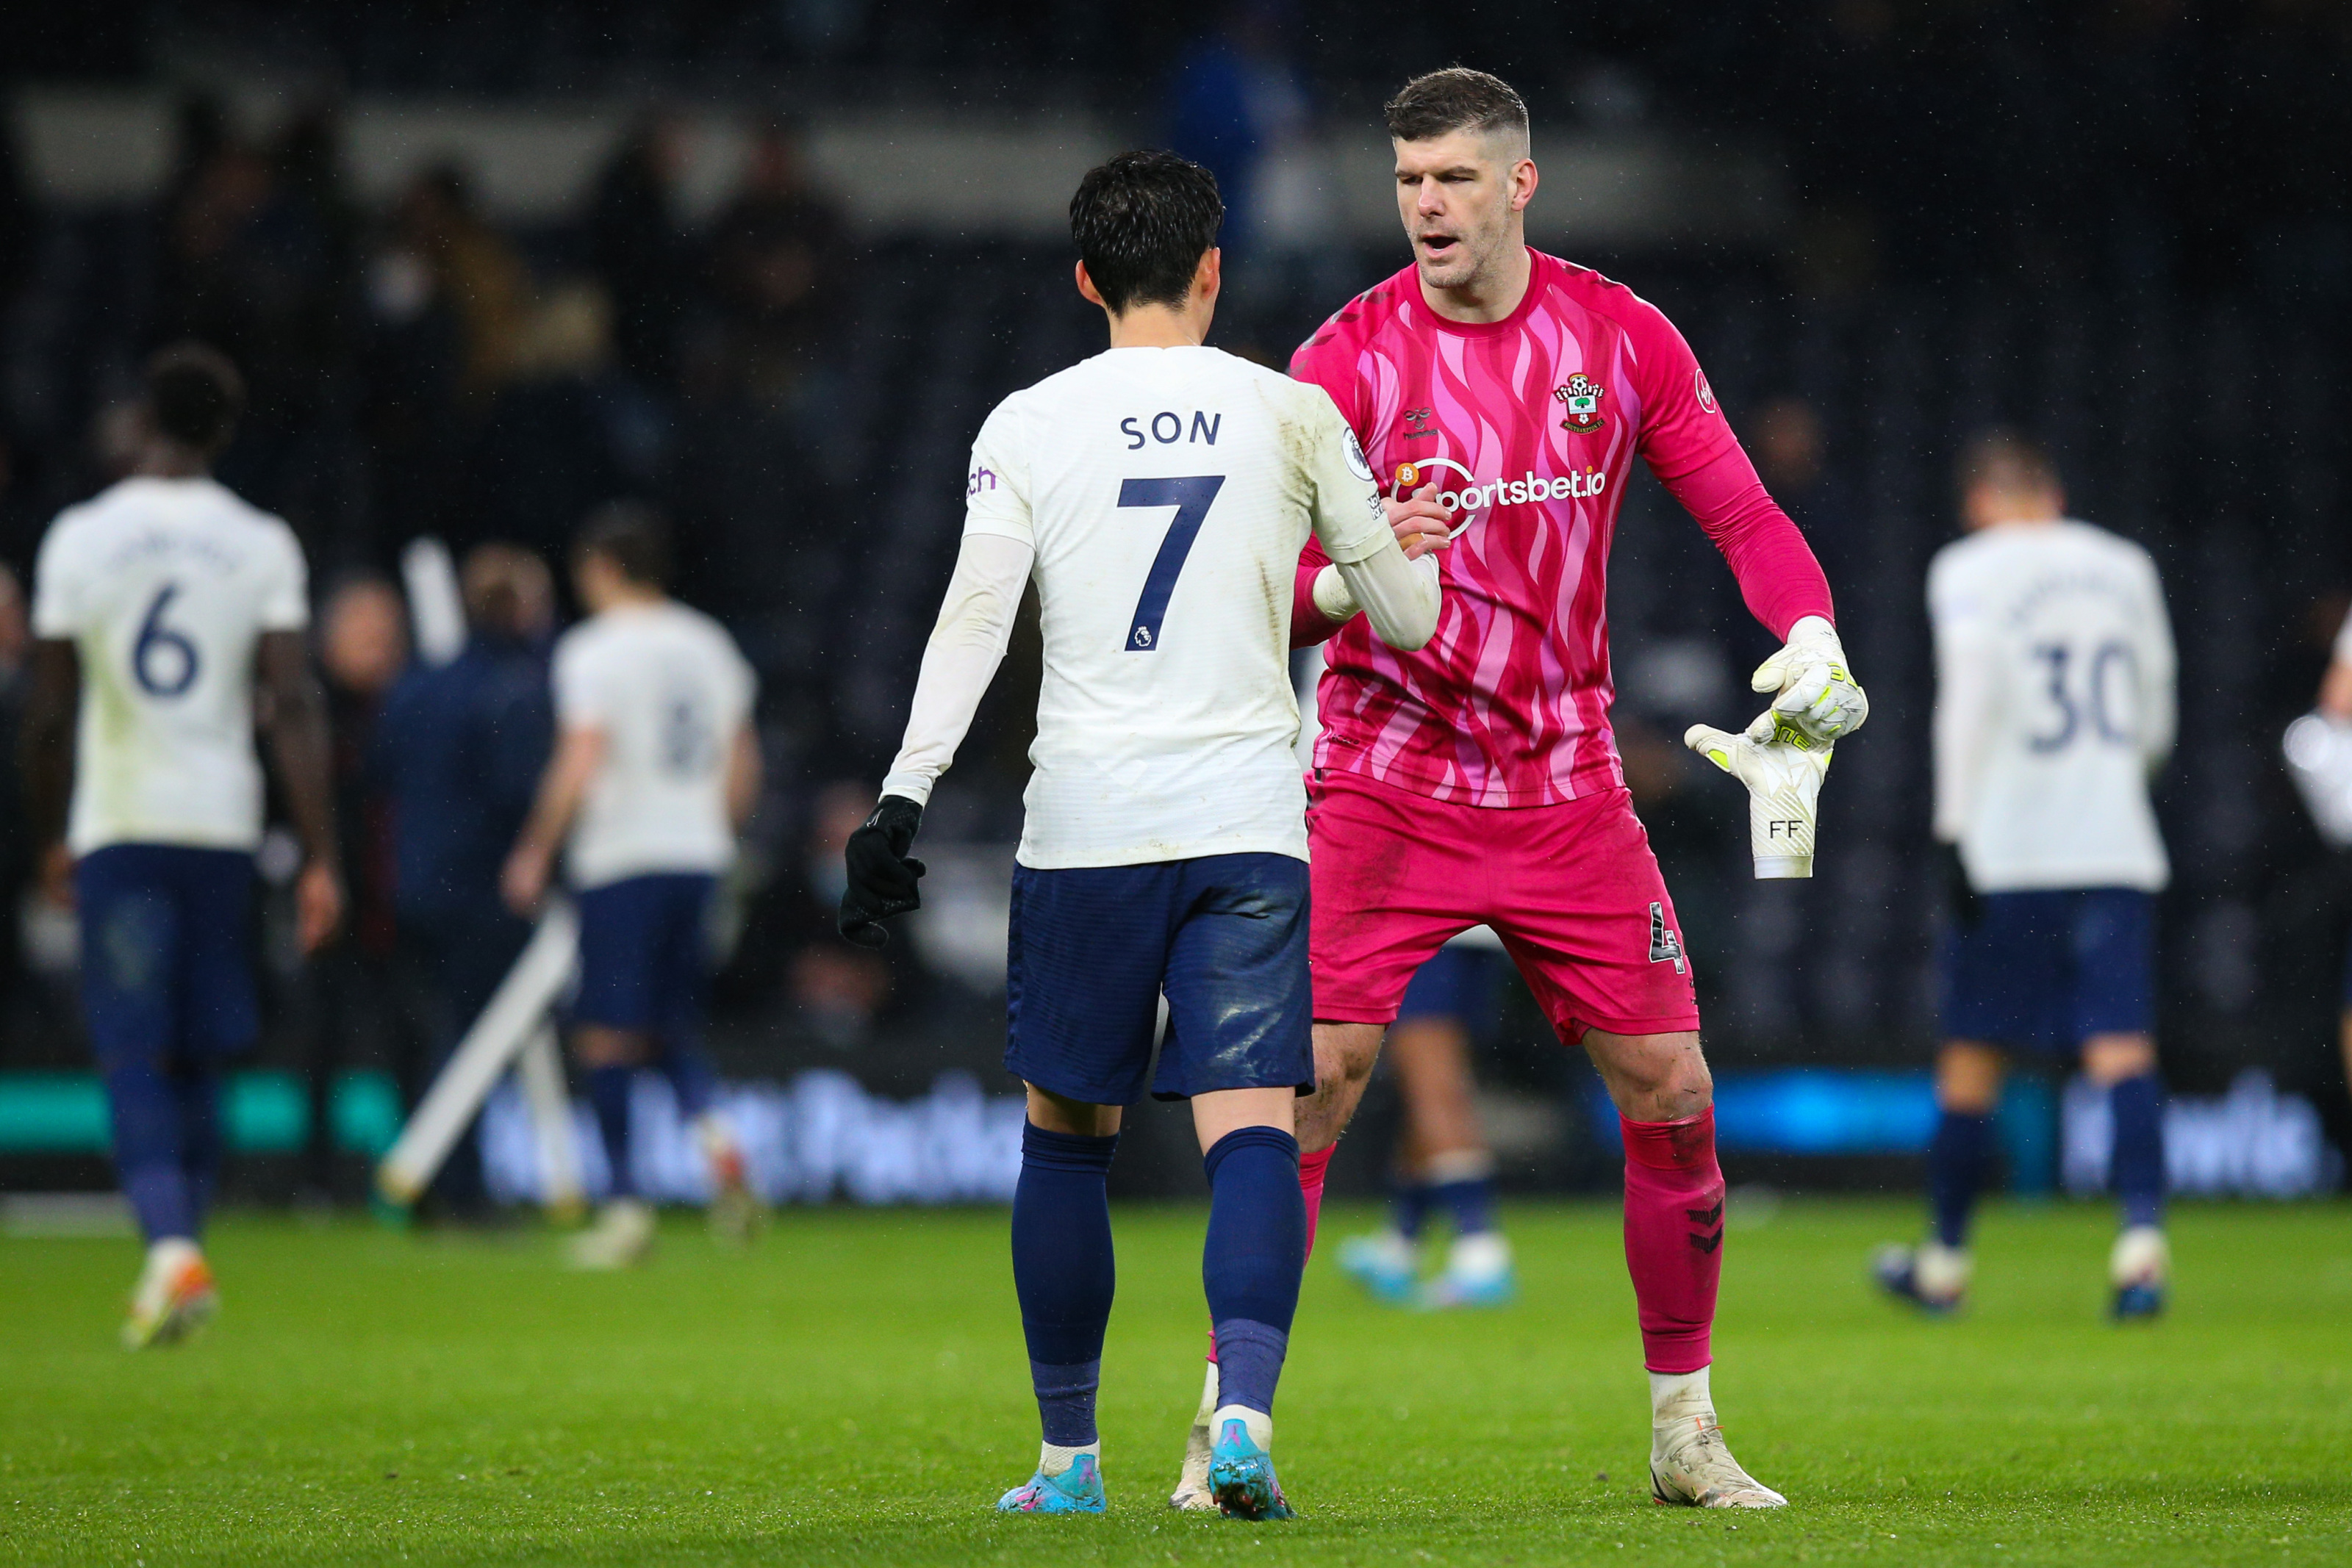 Tottenham sign 'keeper Forster on free transfer from Southampton